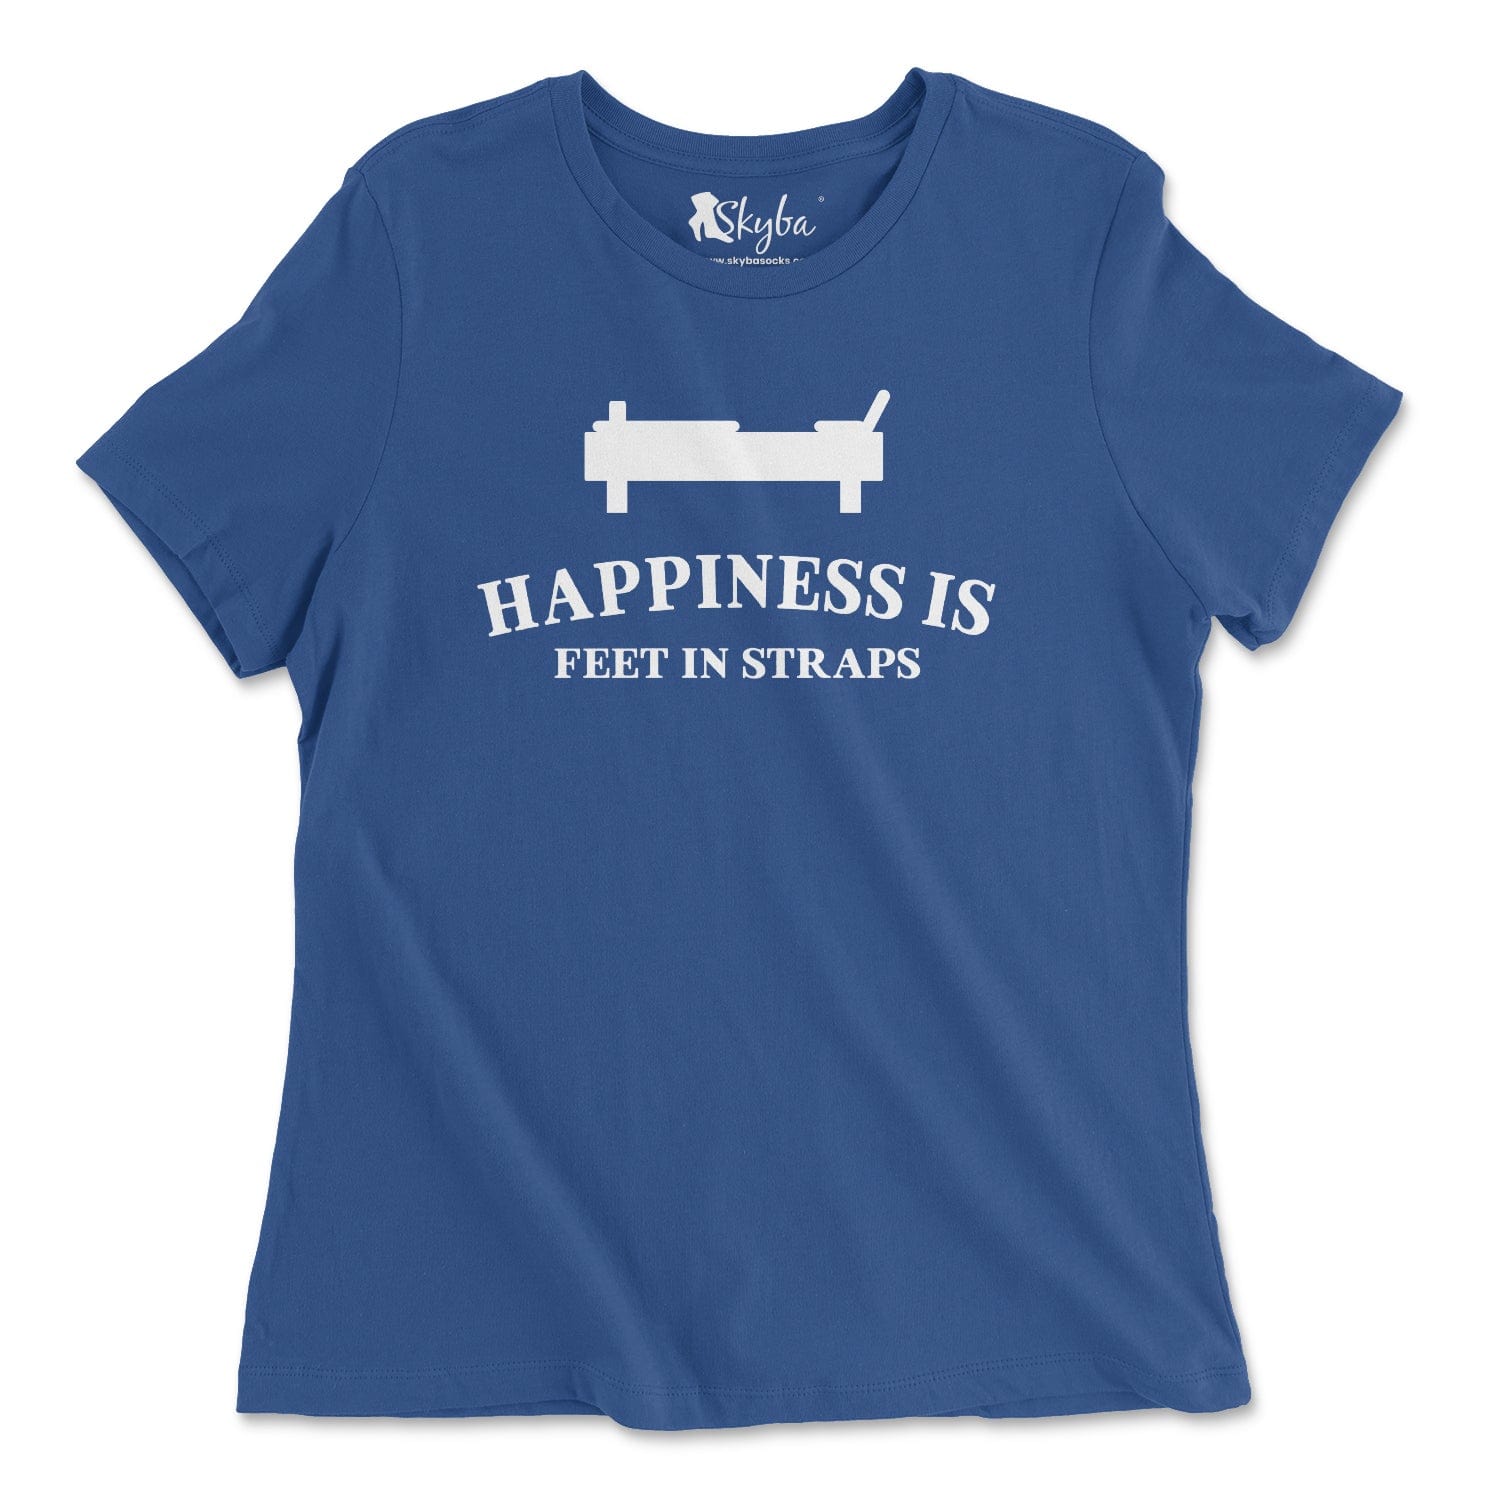 Happiness is Feet in Straps - Classic Tee Skyba T-Shirt